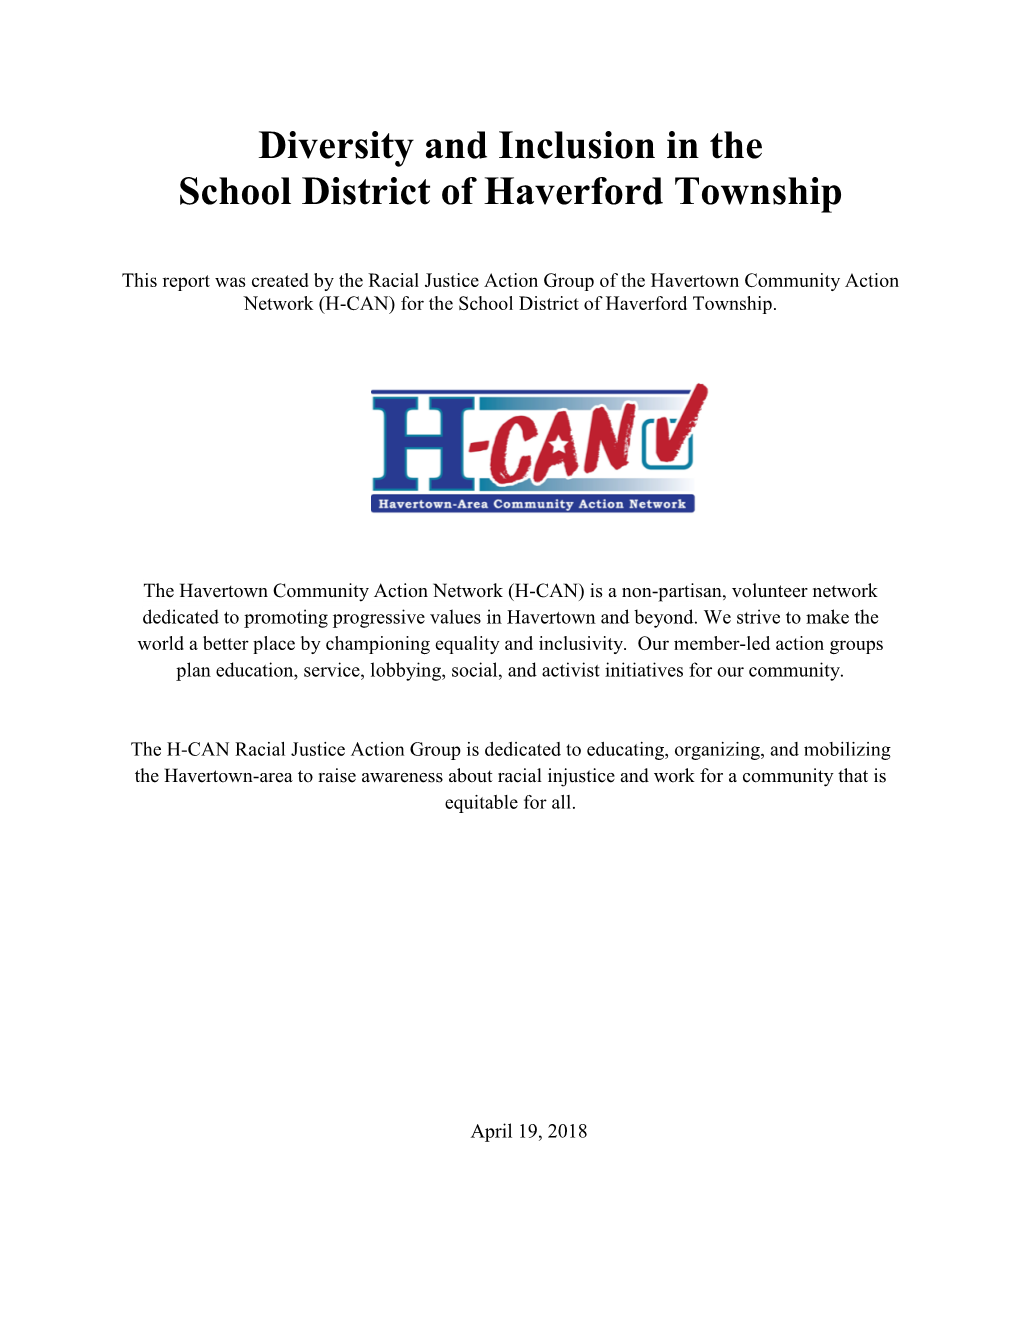 Diversity and Inclusion in the School District of Haverford Township